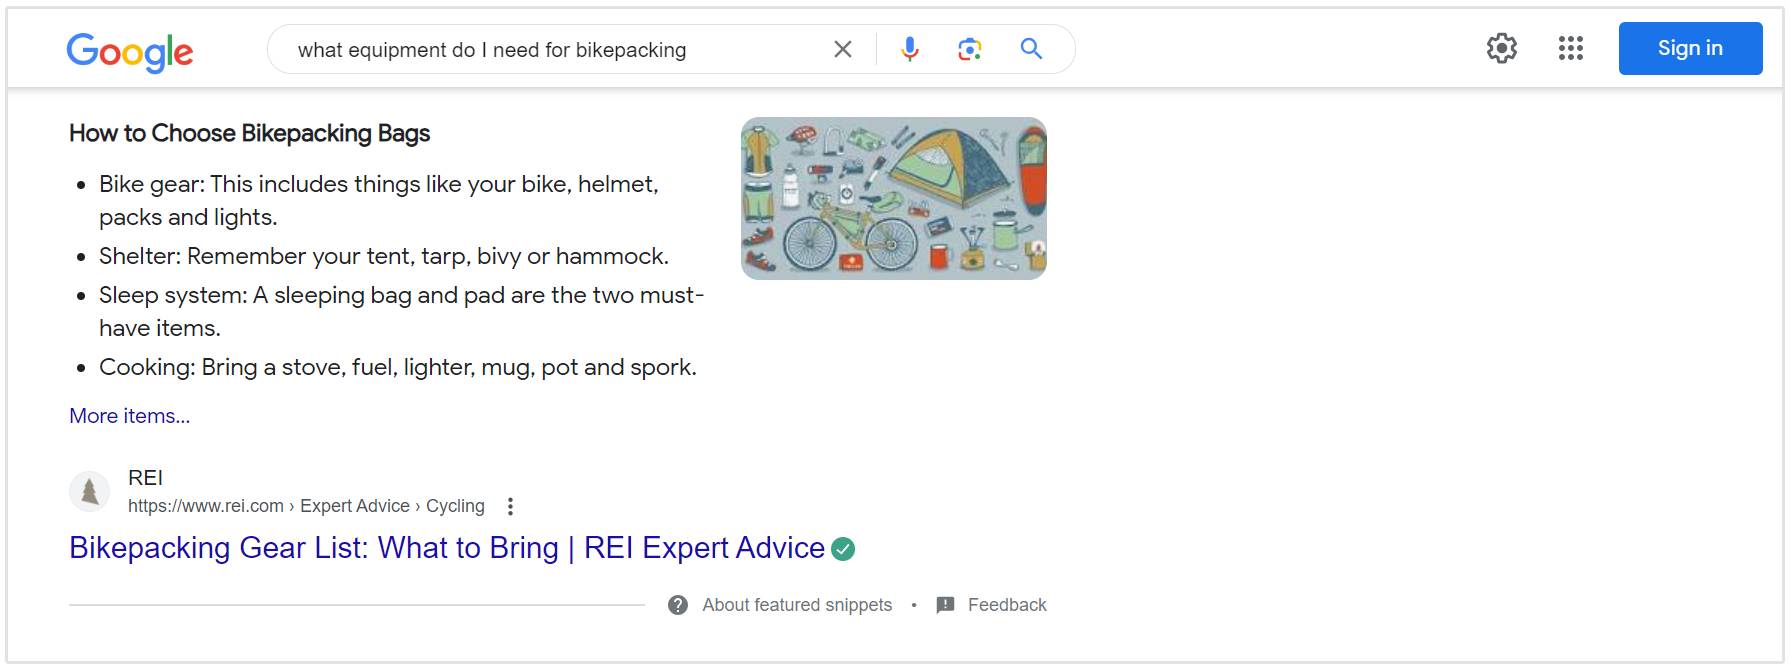 google search results without sge enabled